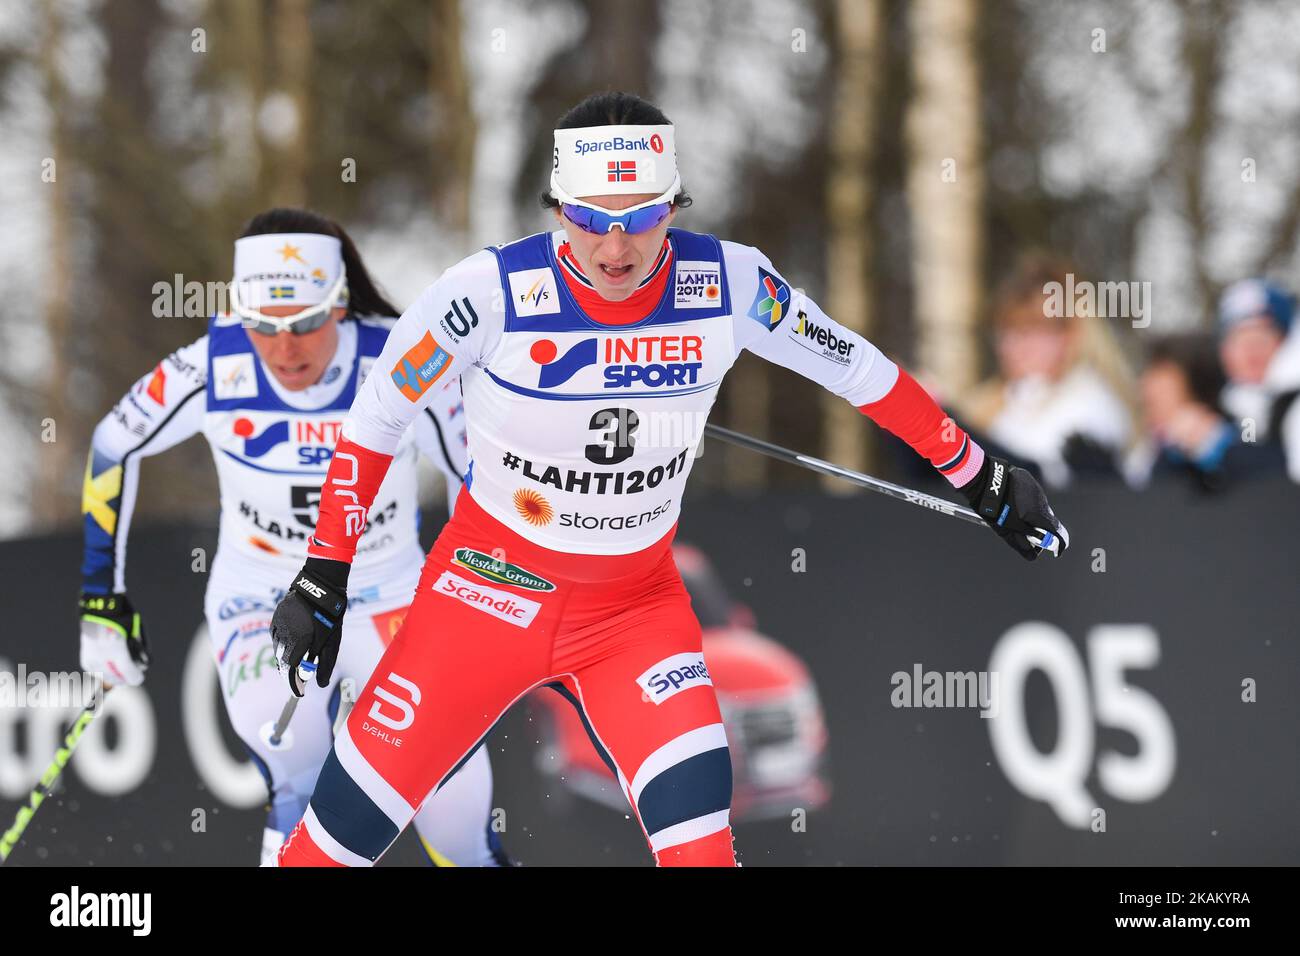 Marit Bjoergen (Right) from Norway and Charlotte Calla from Sweden, during Ladies cross-country 30 km Mass Start Free final, at FIS Nordic World Ski Championship 2017 in Lahti. On Saturday, March 04, 2017, in Lahti, Finland. Photo by Artur Widak *** Please Use Credit from Credit Field ***  Stock Photo